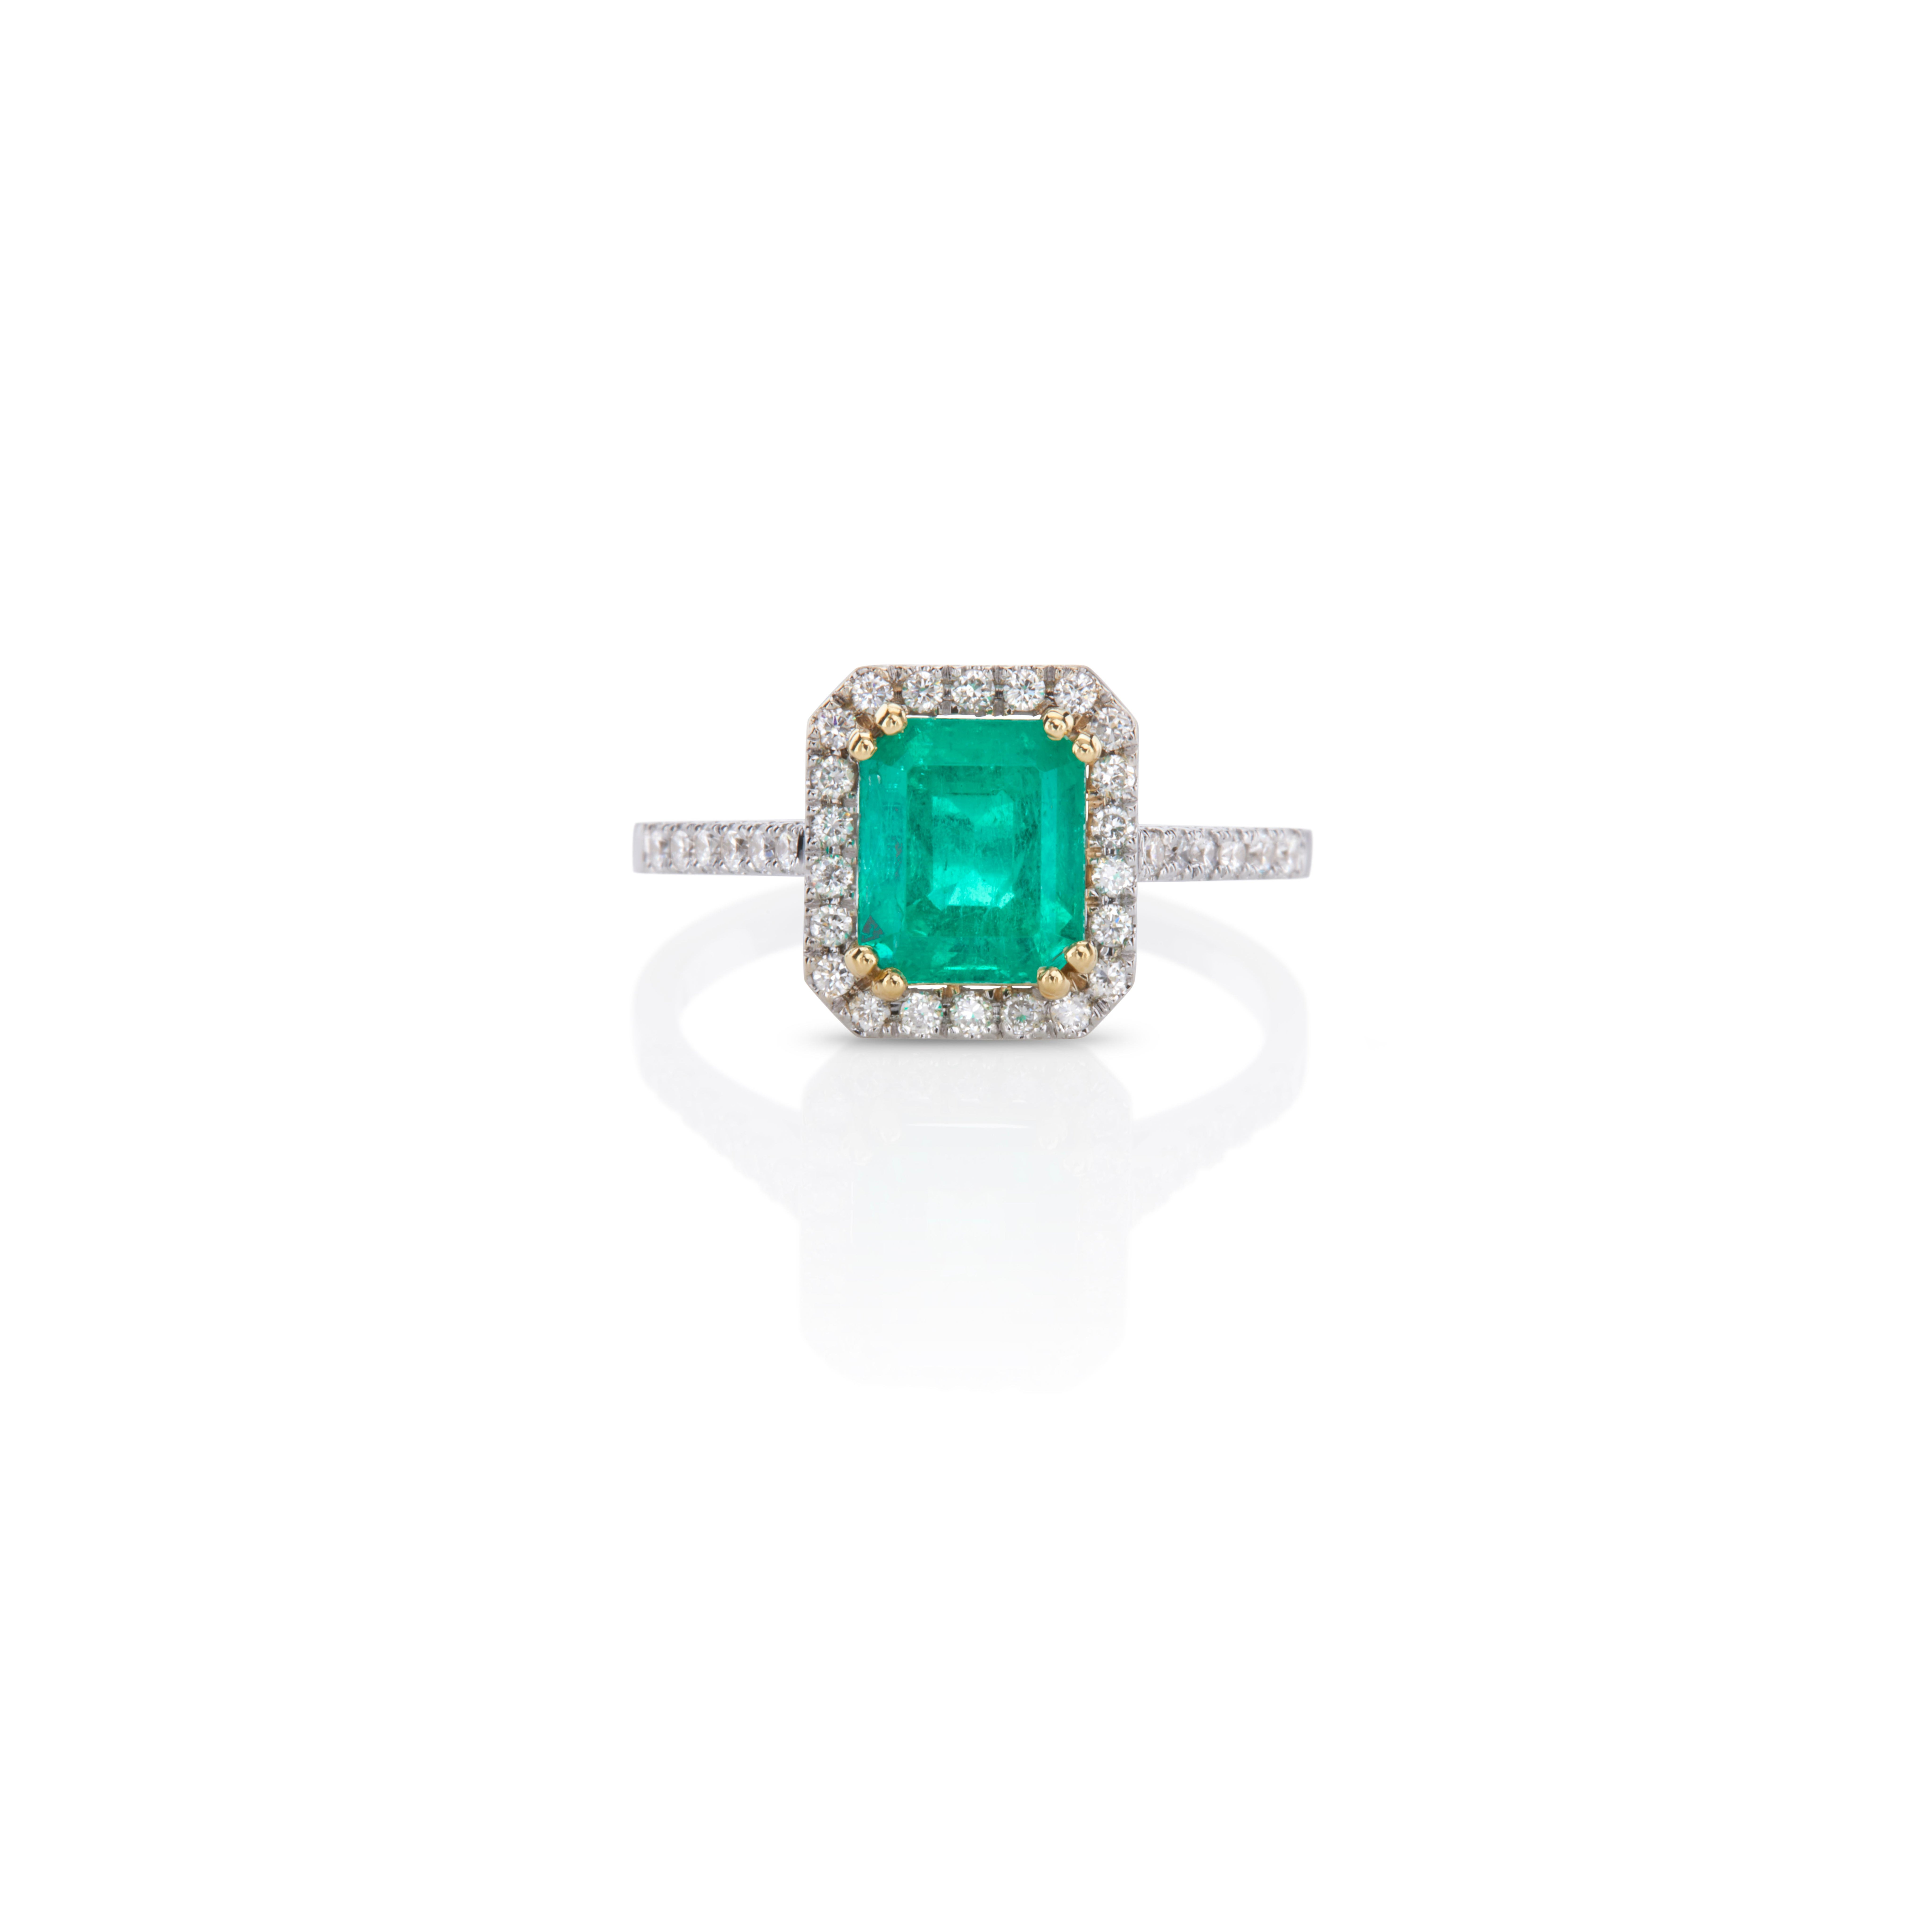 Unique ring made of 18Kt white gold with an rare emerald cut Emerald and Brilliant Cut Diamonds around it. 
The Emerald is carefully set among four double yellow gold prongs while the the brilliant cut diamonds around the beautiful green stone